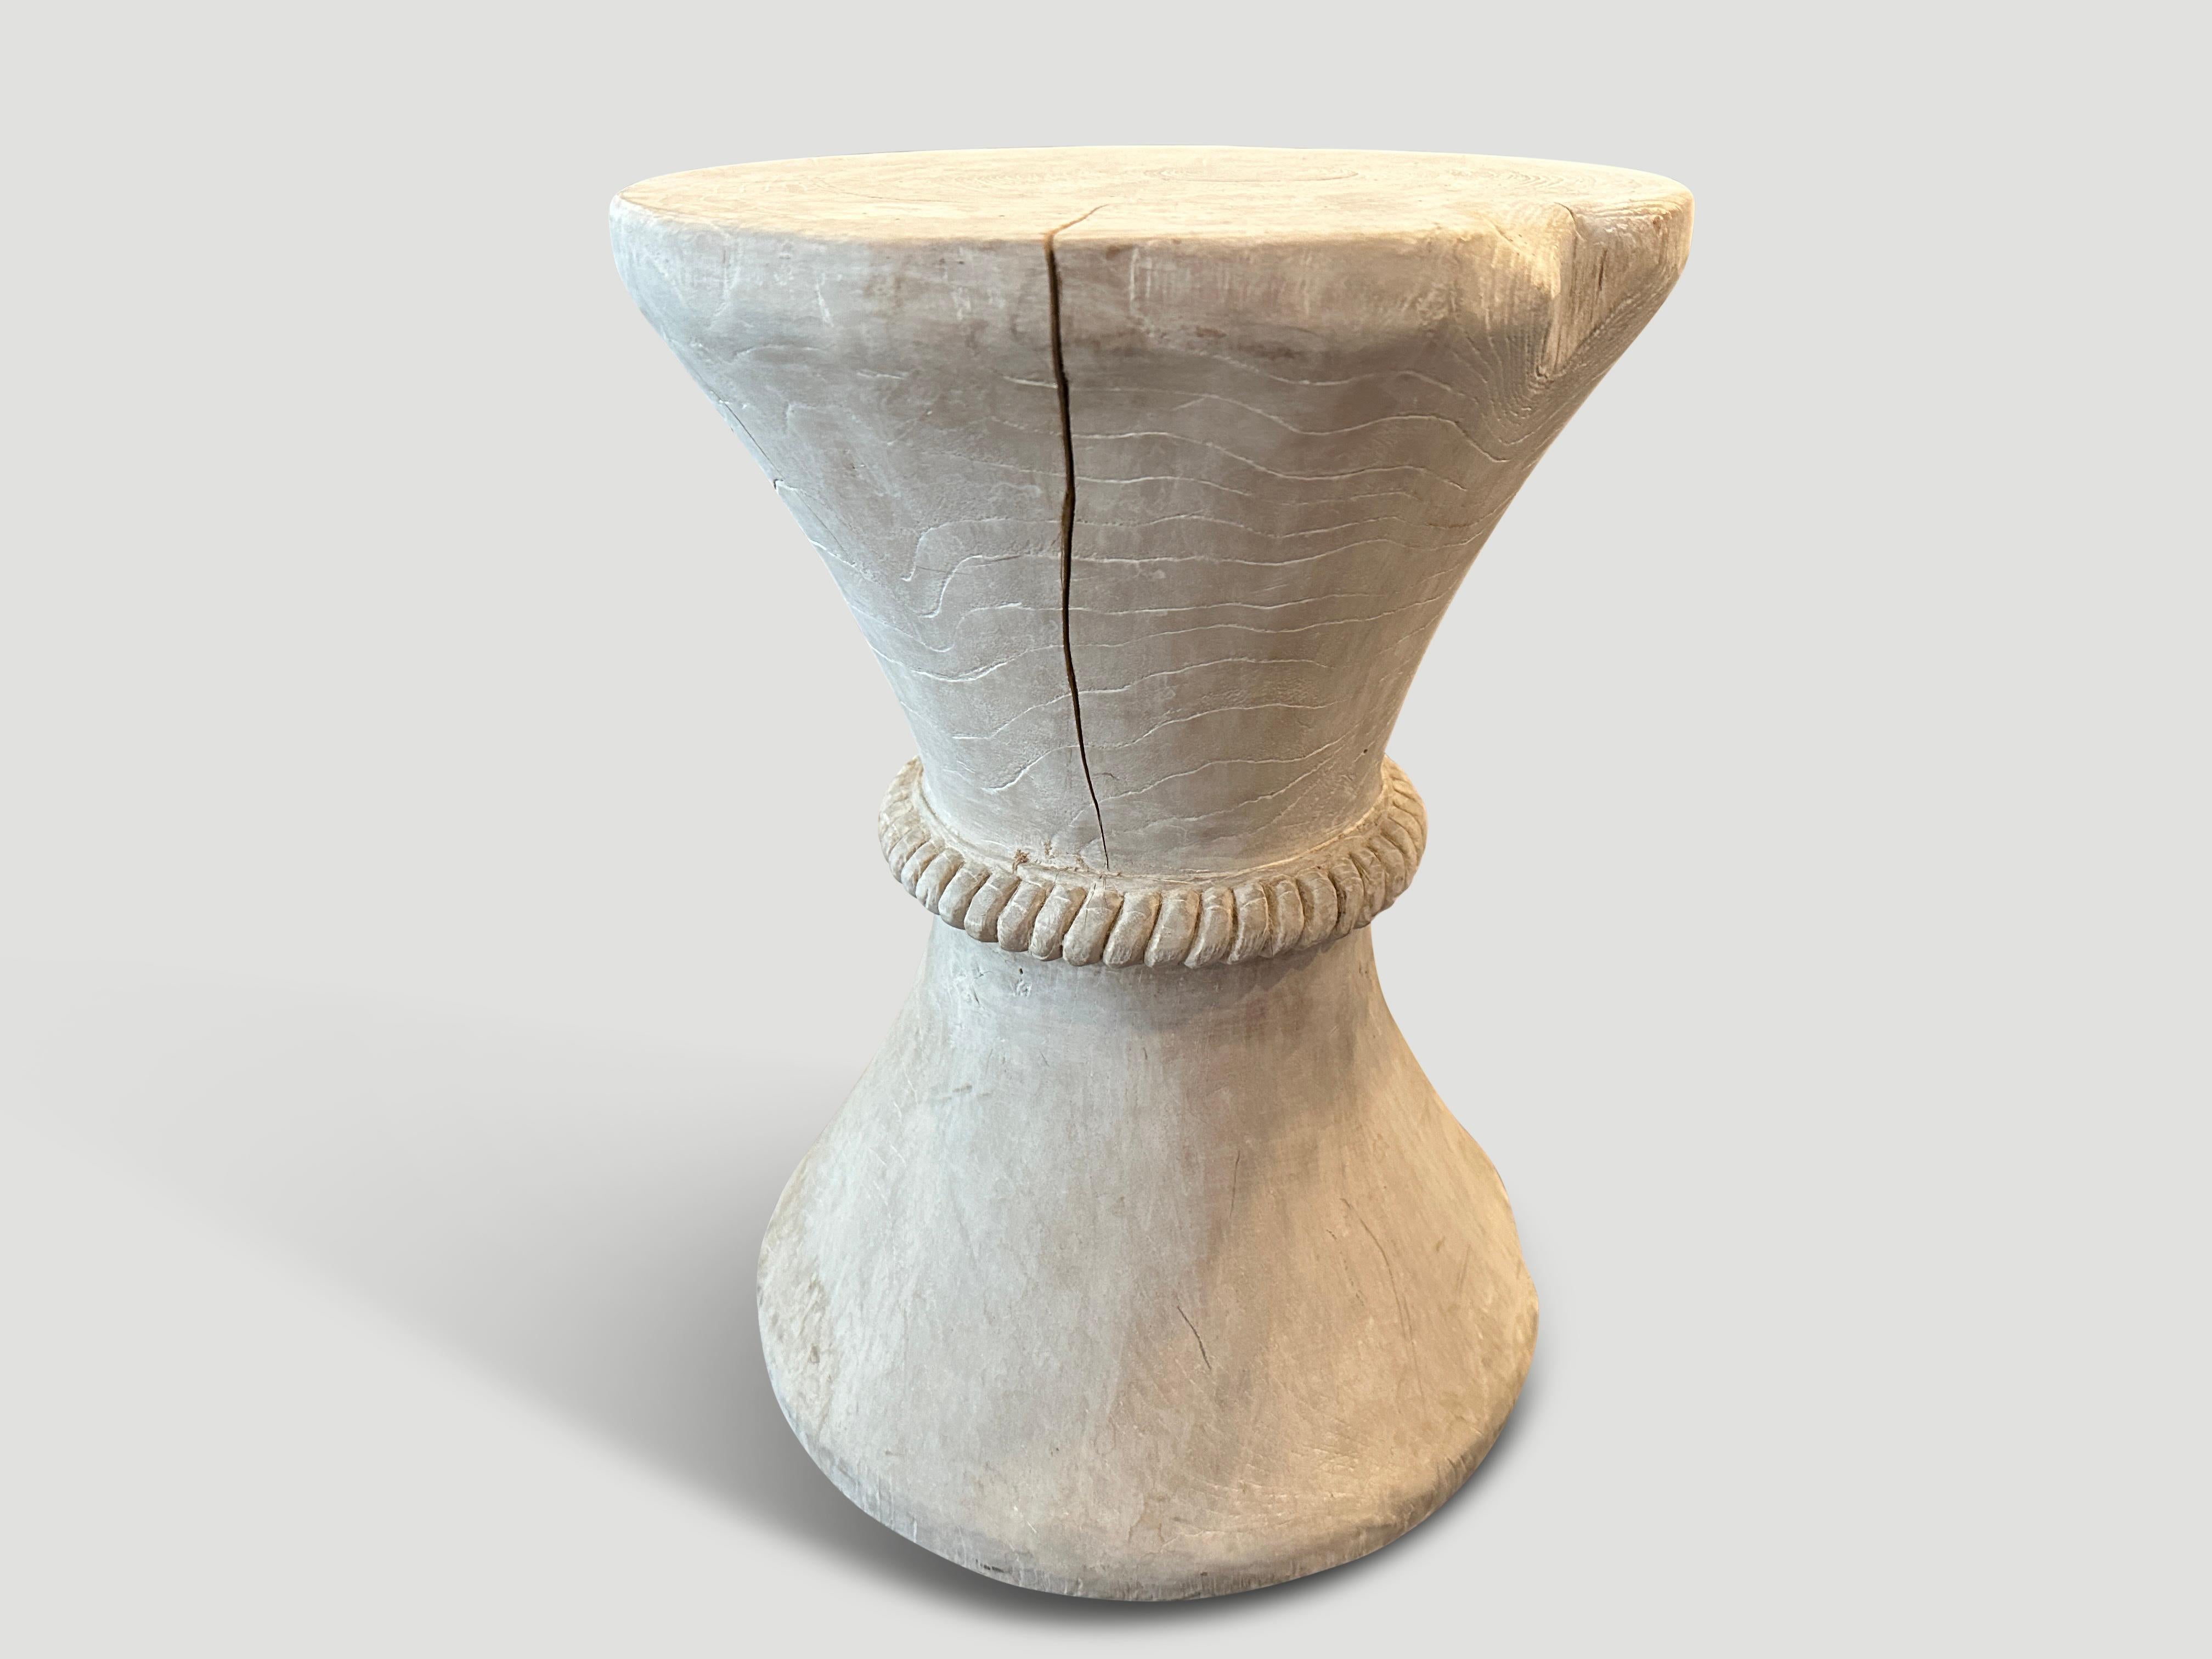 Andrianna Shamaris Hourglass White Washed Teak Wood Side Table or Stool In Excellent Condition For Sale In New York, NY